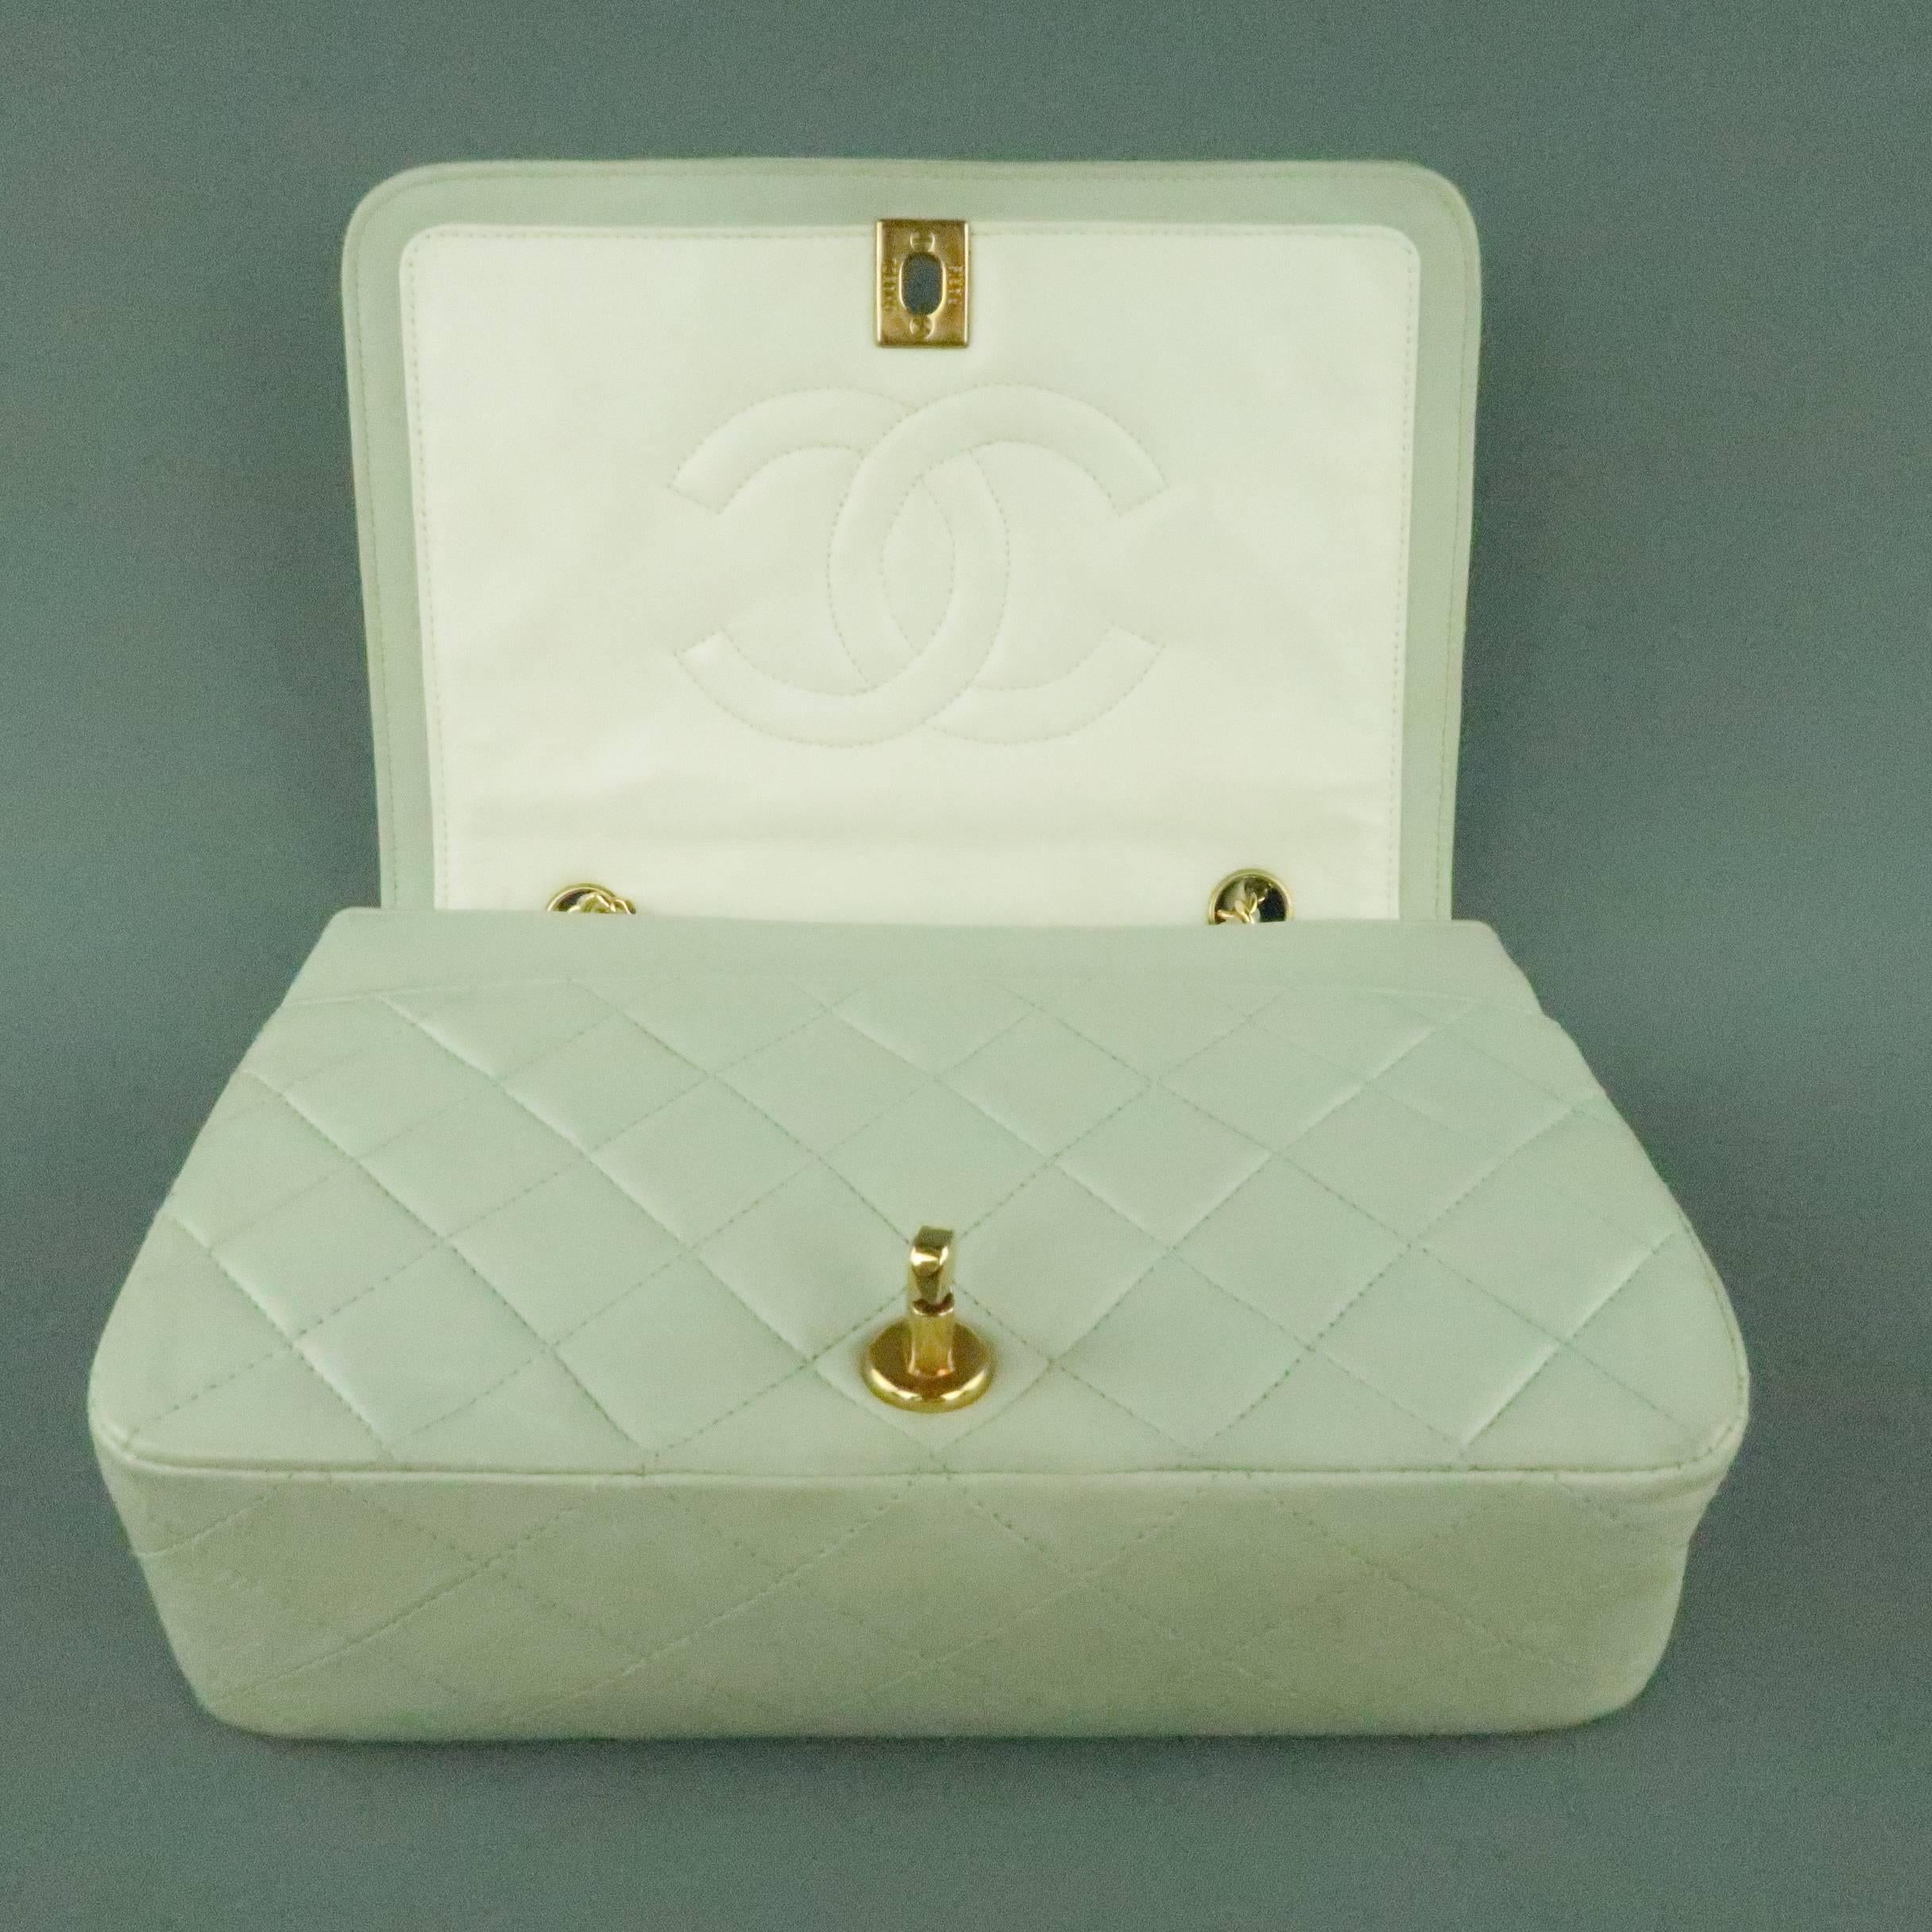 Chanel Pastel Blue Vintage Quilted Leather Gold Chain Handbag 6